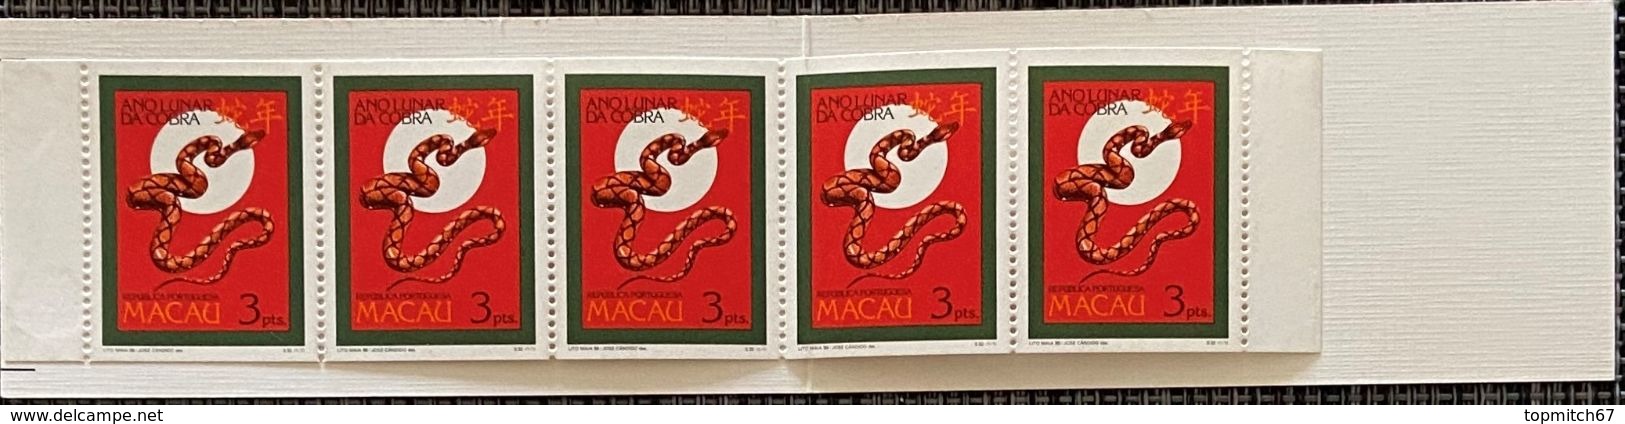 MAC2526MNH-Lunar Year Of The Snake Booklet Of 5 MNH Stamps - Macau - 1989 - Cuadernillos